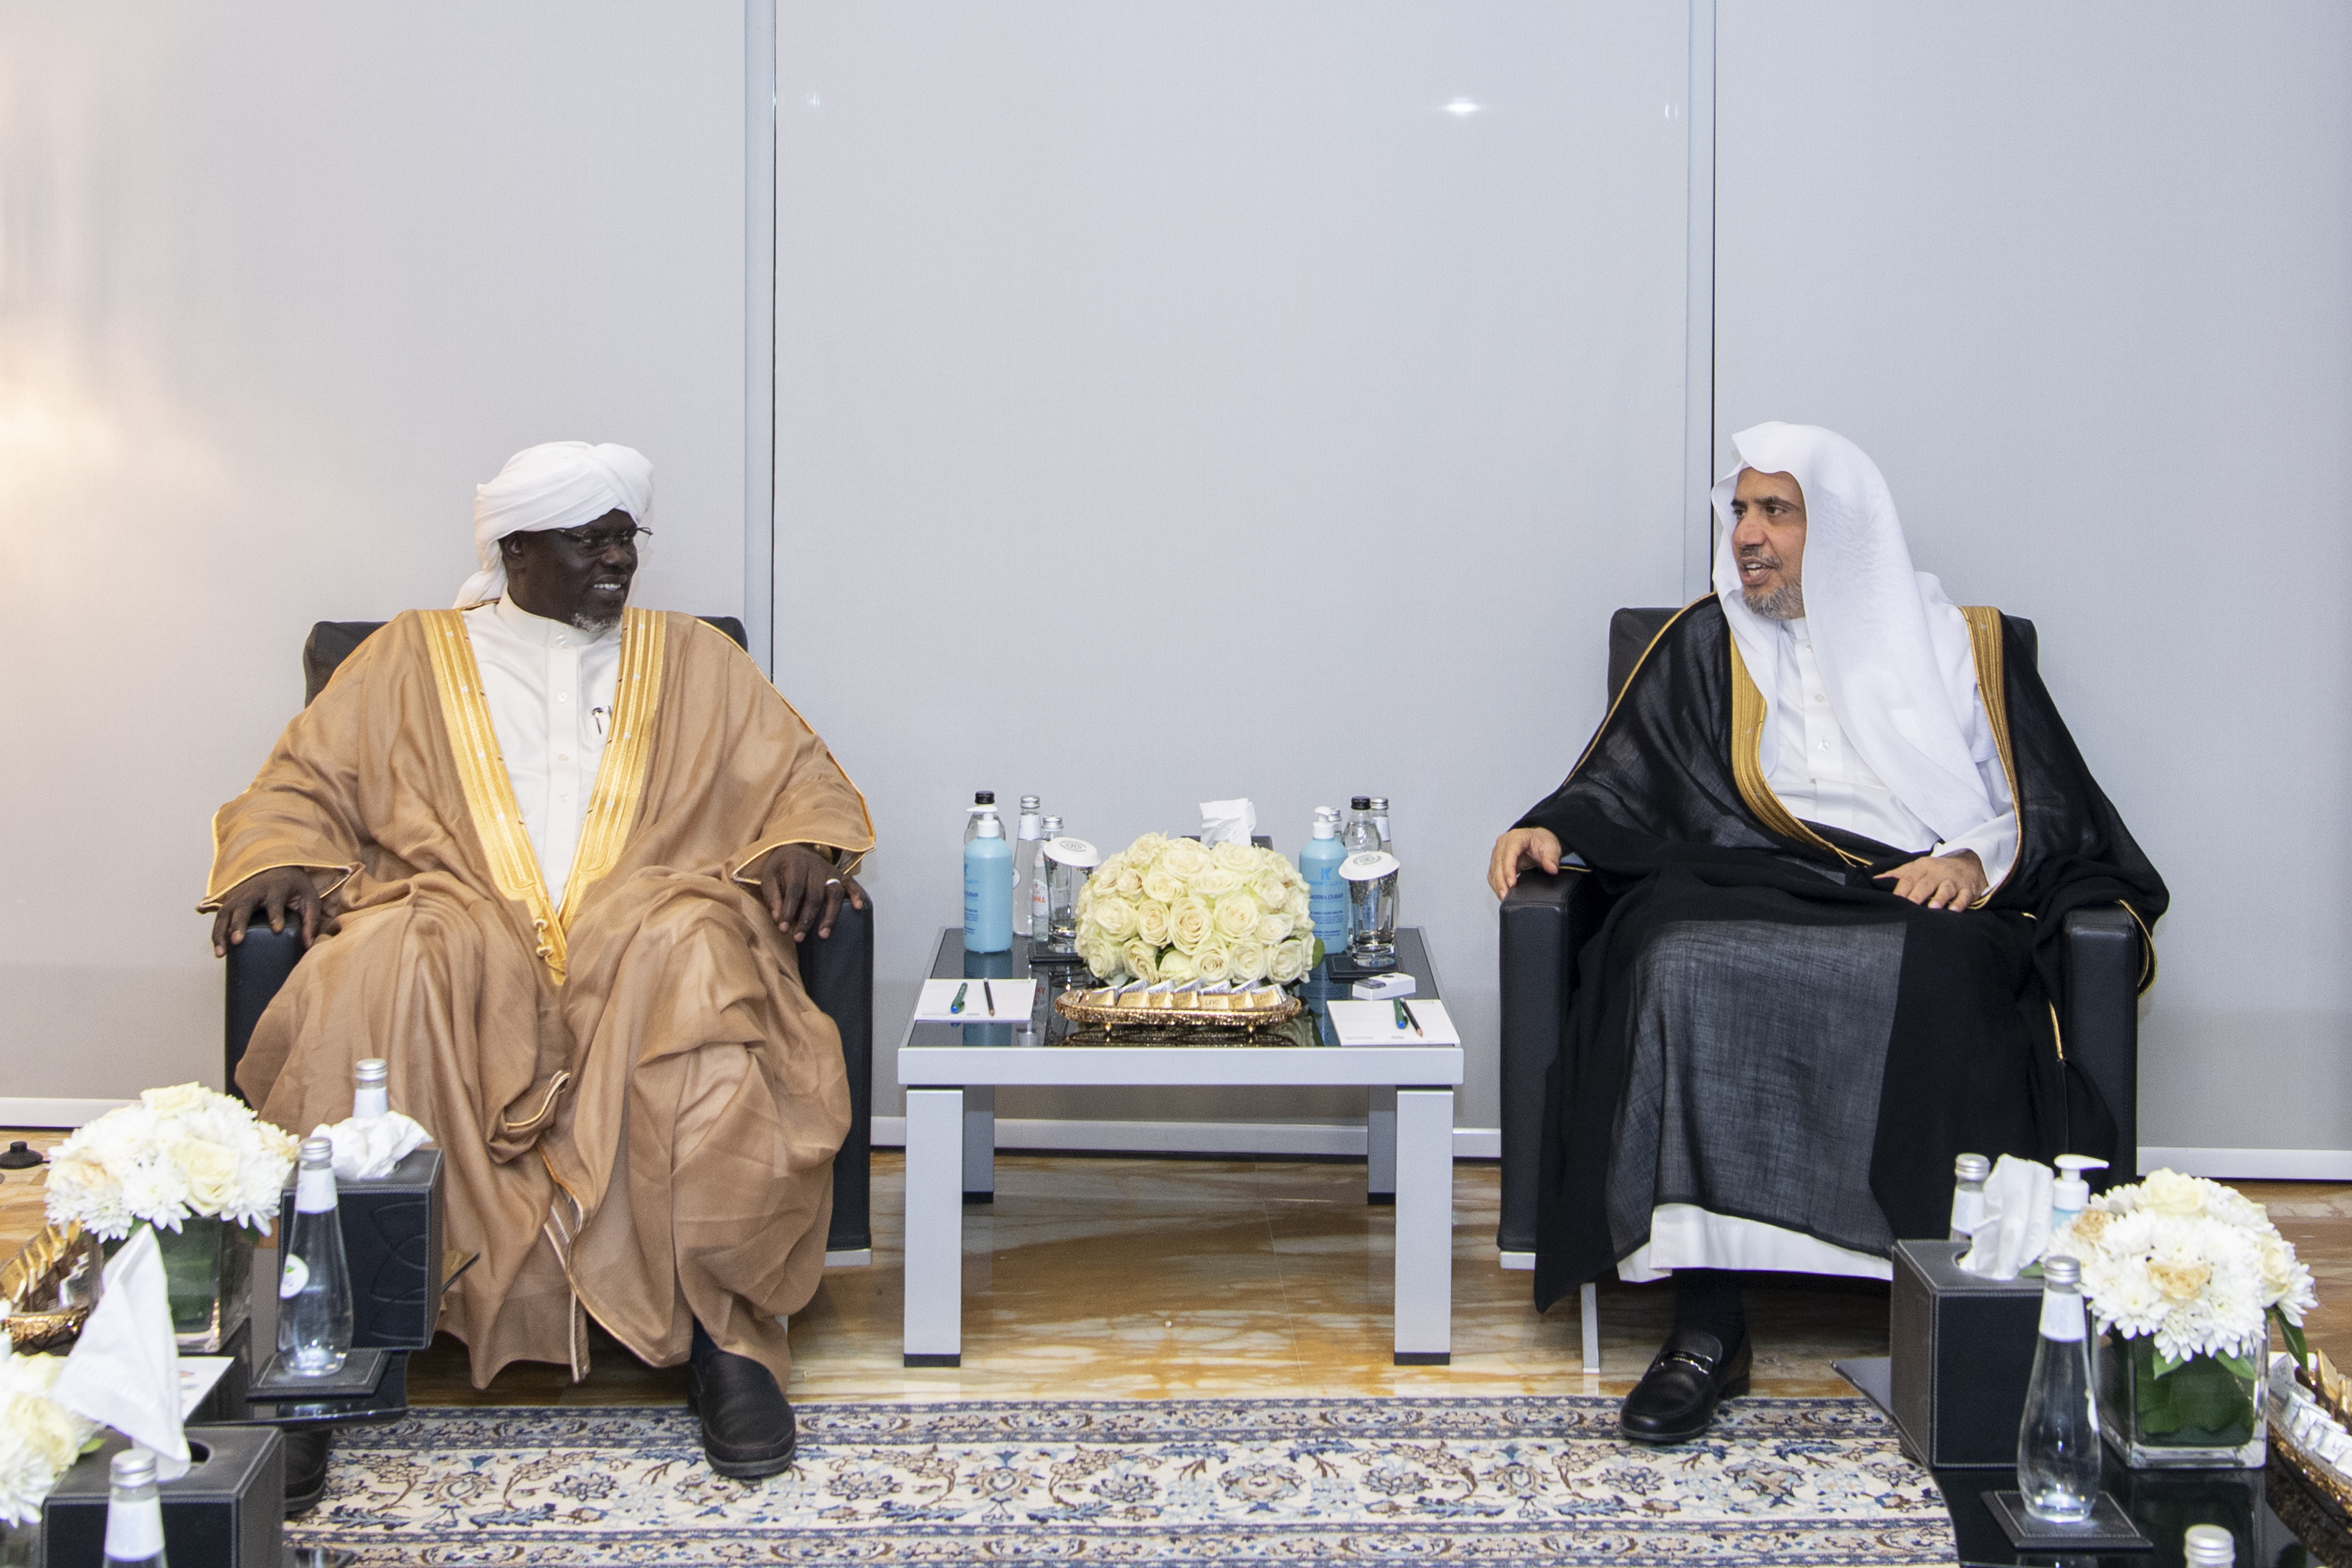 His Excellency Sheikh Dr. Mohammad Al-Issa meets with His Excellency Excellency Sheikh Dr. Abdullah Barak, President of the Islamic Council of Southern Sudan